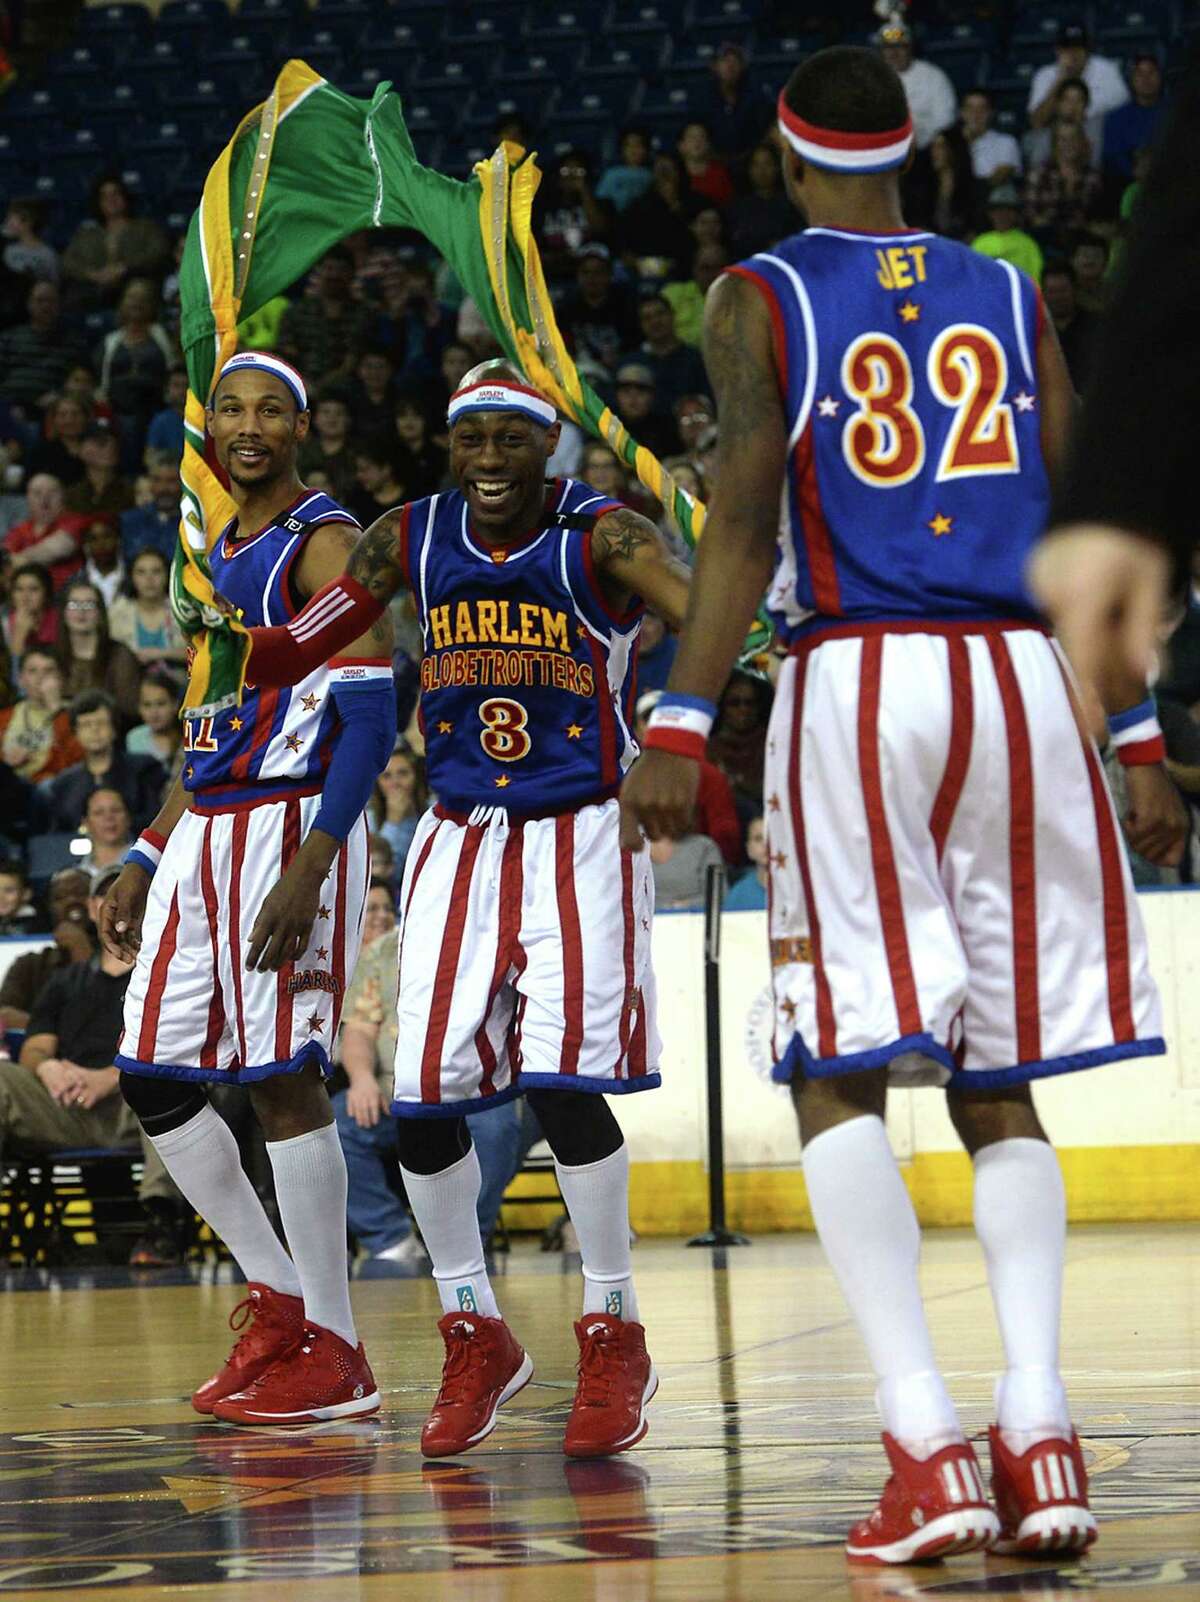 The Harlem Globetrotters celebrate an early point scored against the Washington Generals during their show Wednesday night at Ford Park. Photo taken Wednesday, January 21, 2015 Kim Brent/The Enterprise